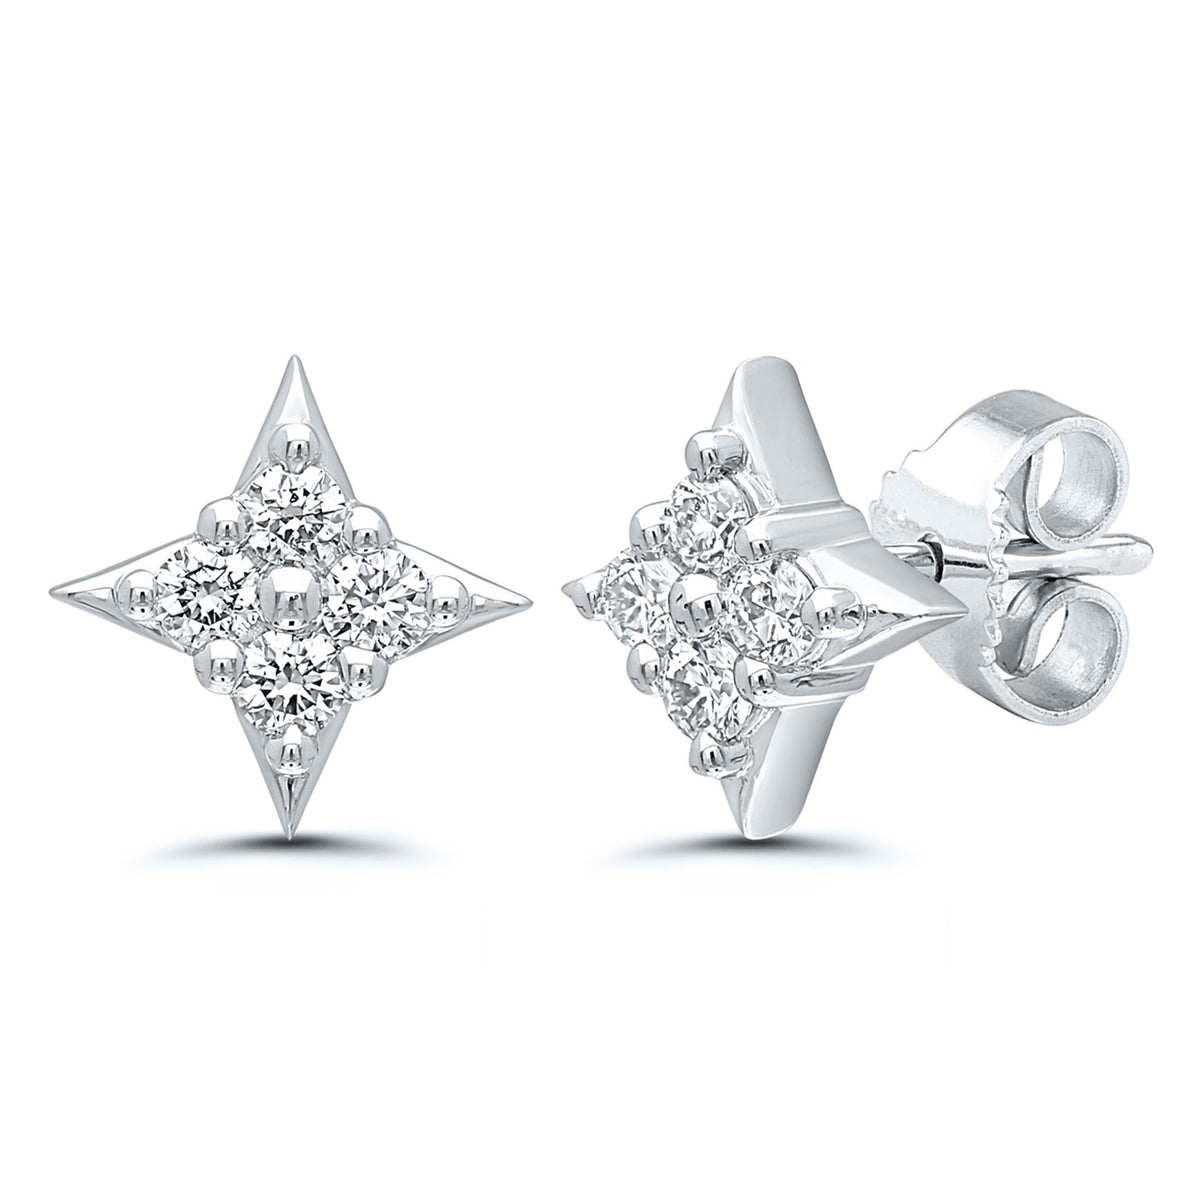 Star Of Hope 14Kt White Gold Earrings with.38cttw Natural Diamonds